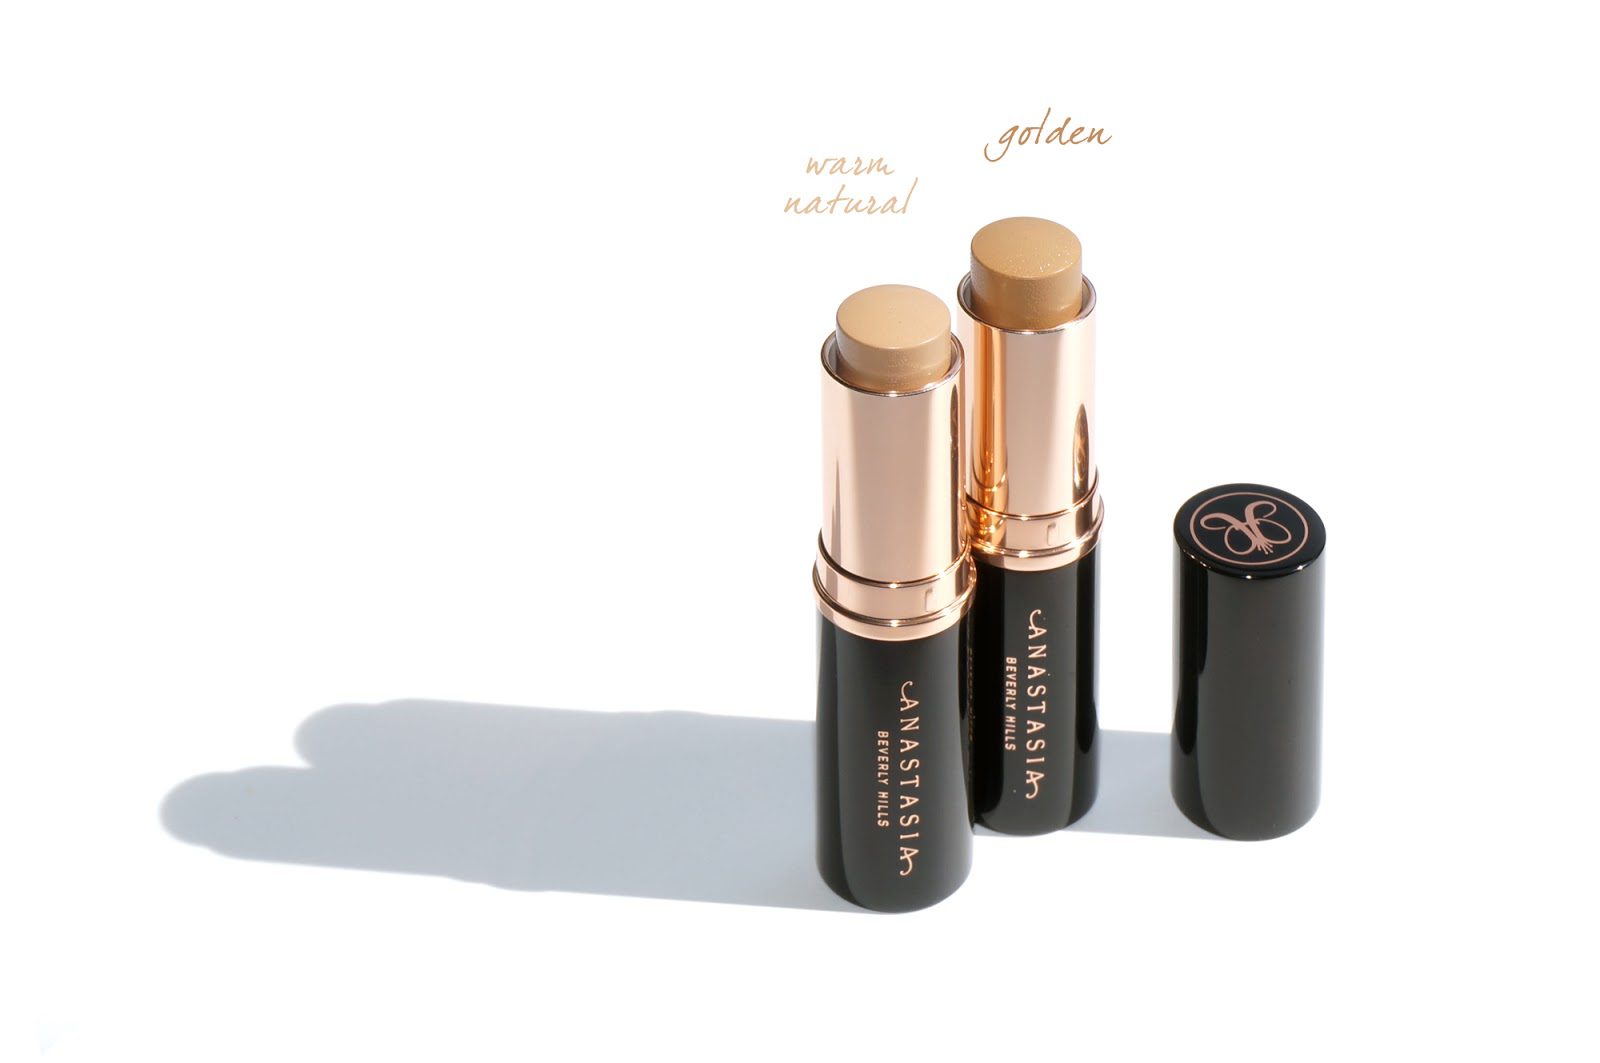 Anastasia Beverly Hills Stick Foundation in Warm Natural and Golden - The Beauty Look Book